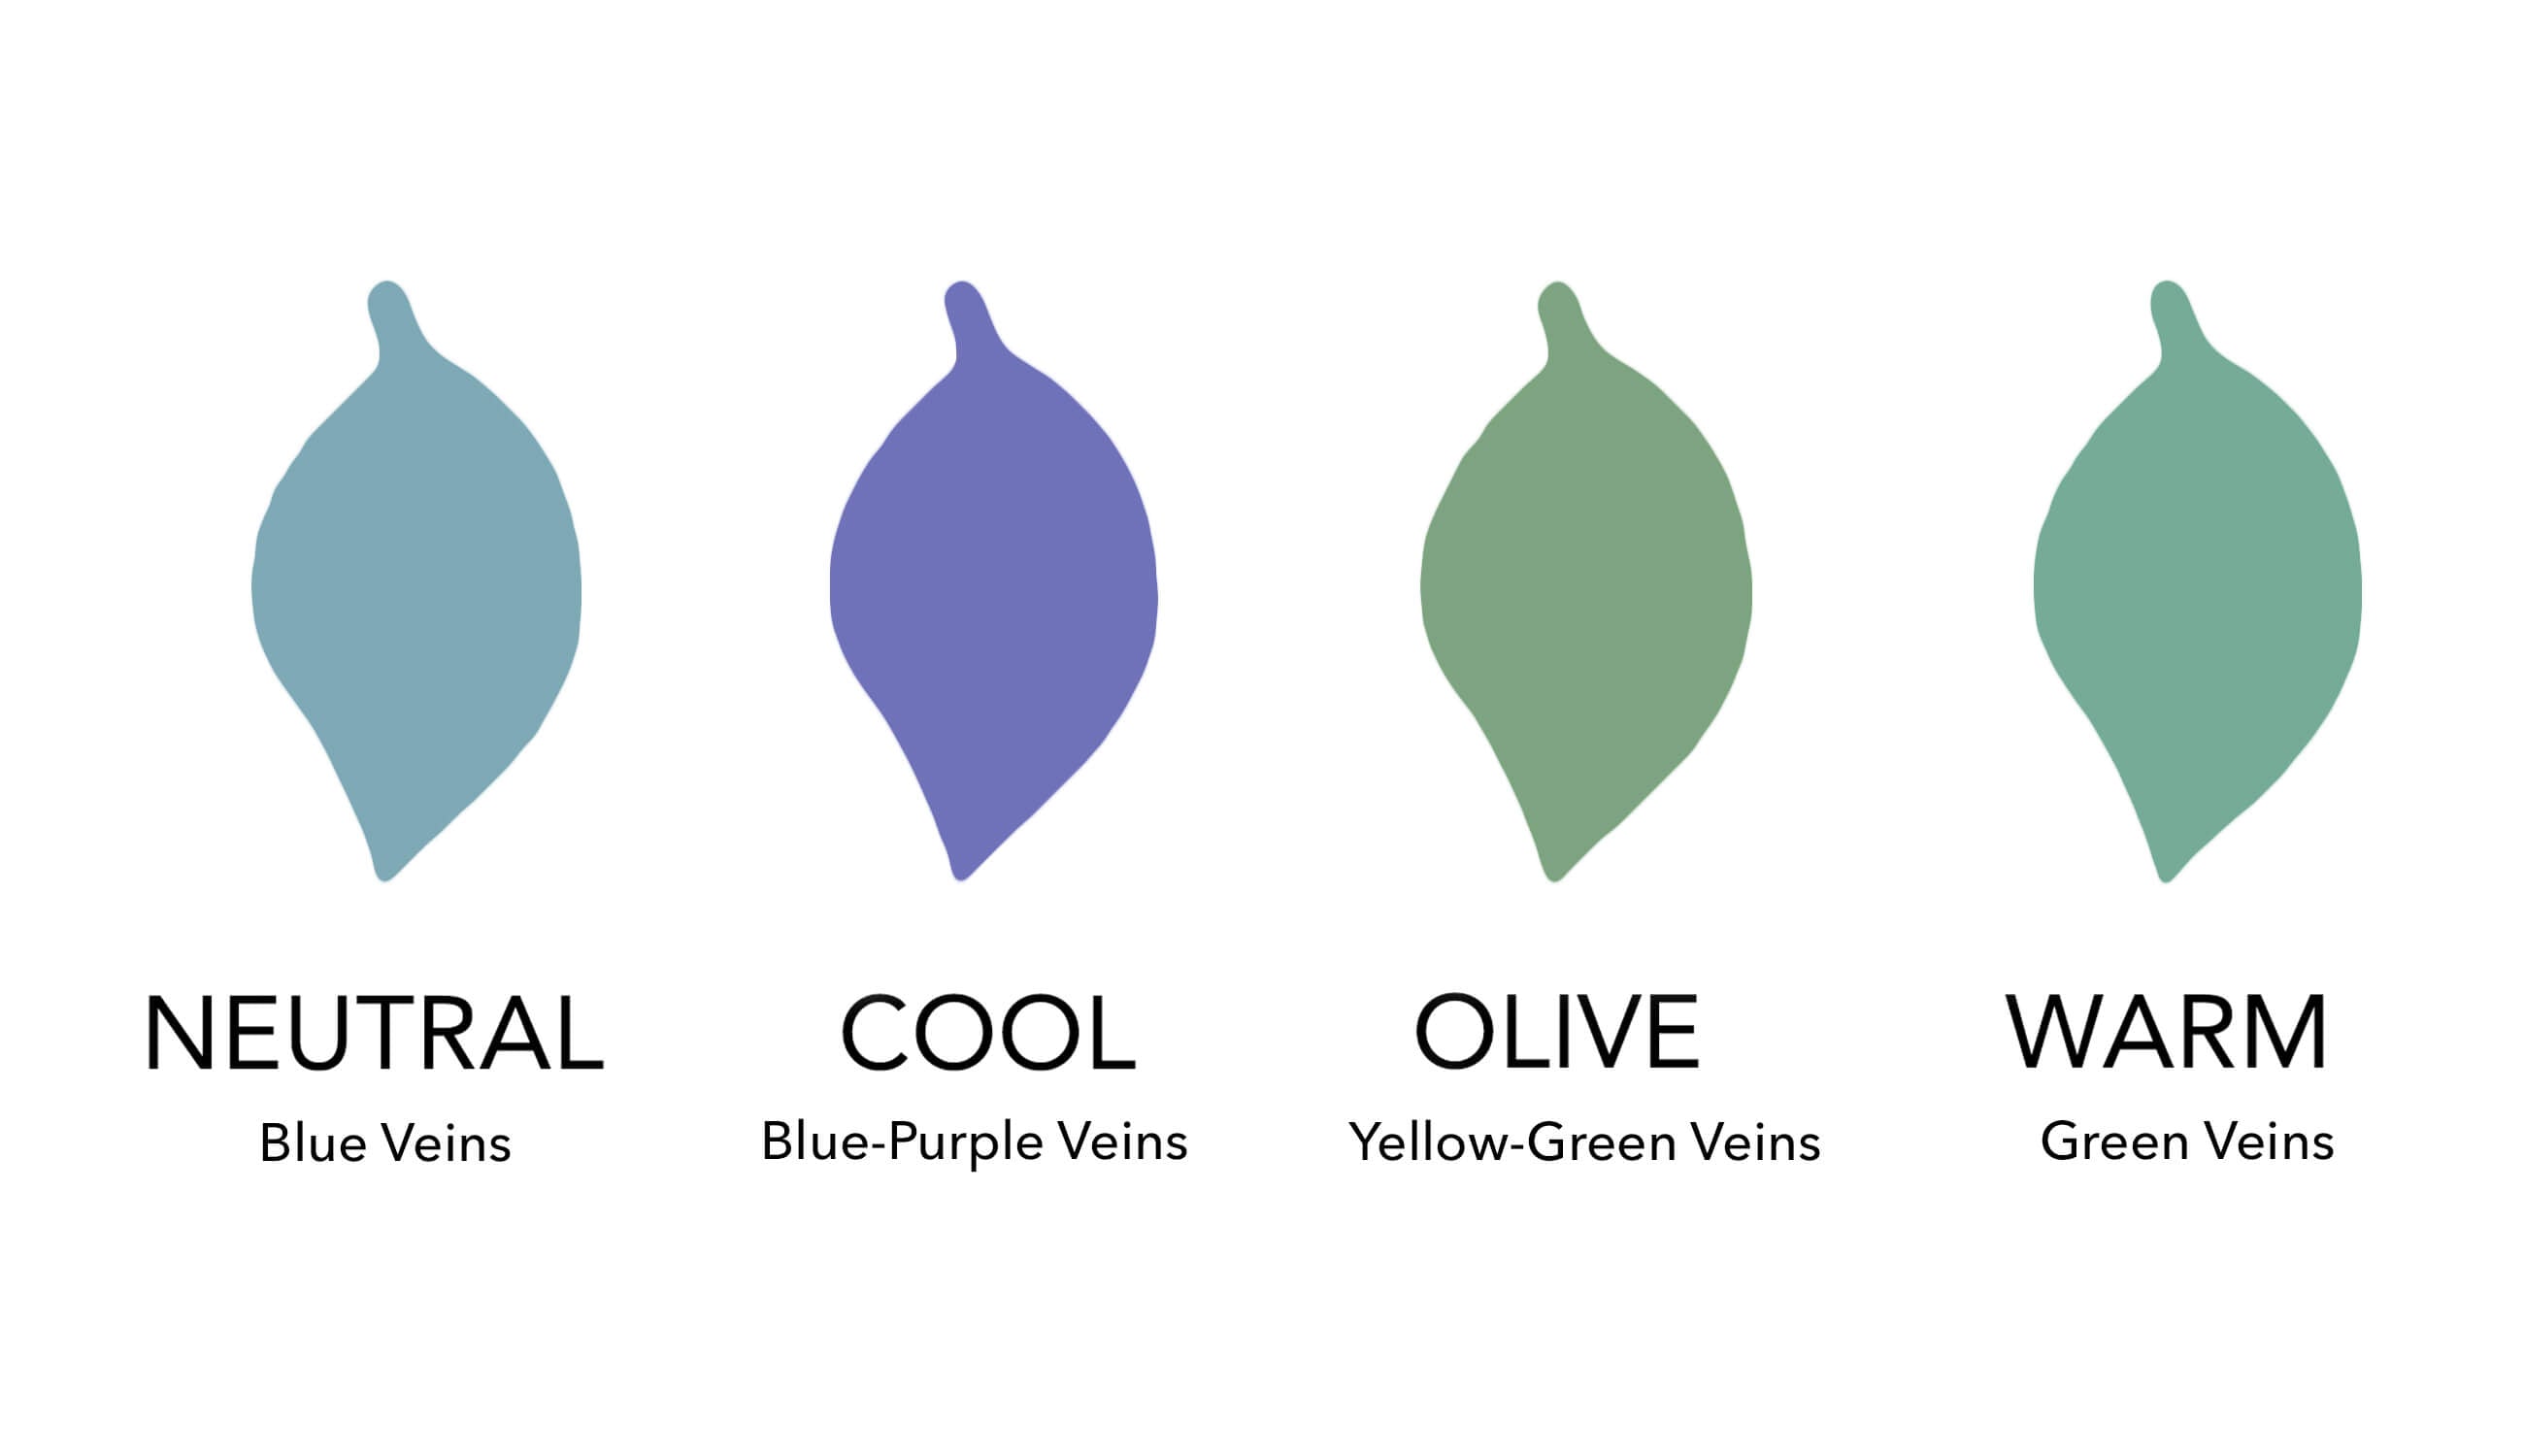 4. "Blue Veins and Hair Color: Tips for Choosing the Right Shade" - wide 4